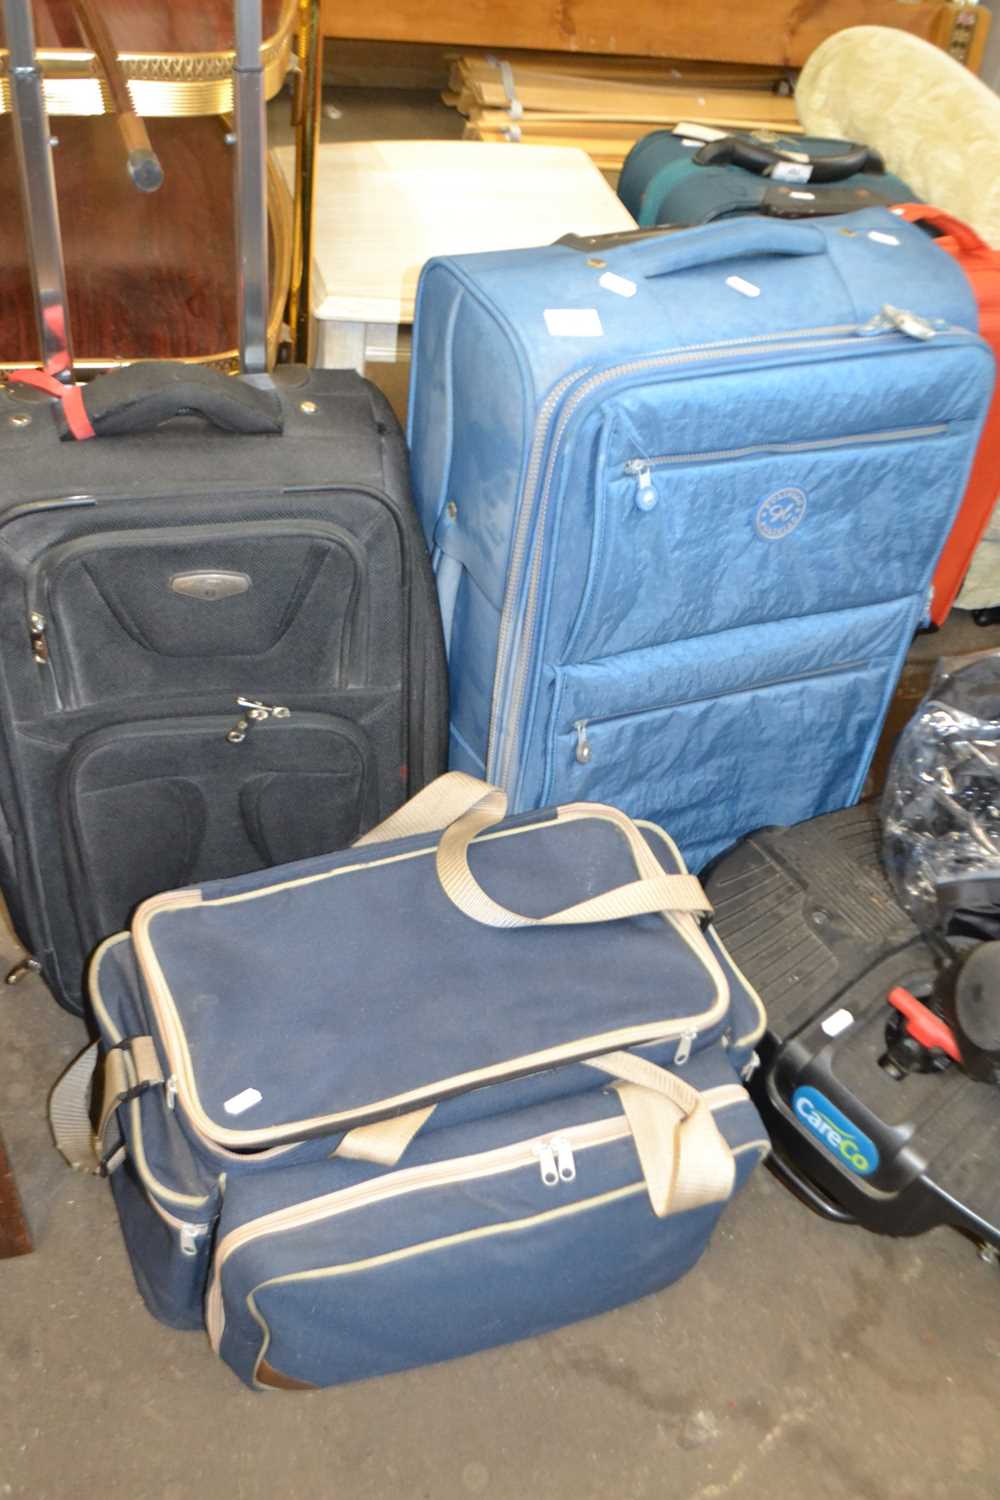 Two suitcases and a blue canvas picnic hamper